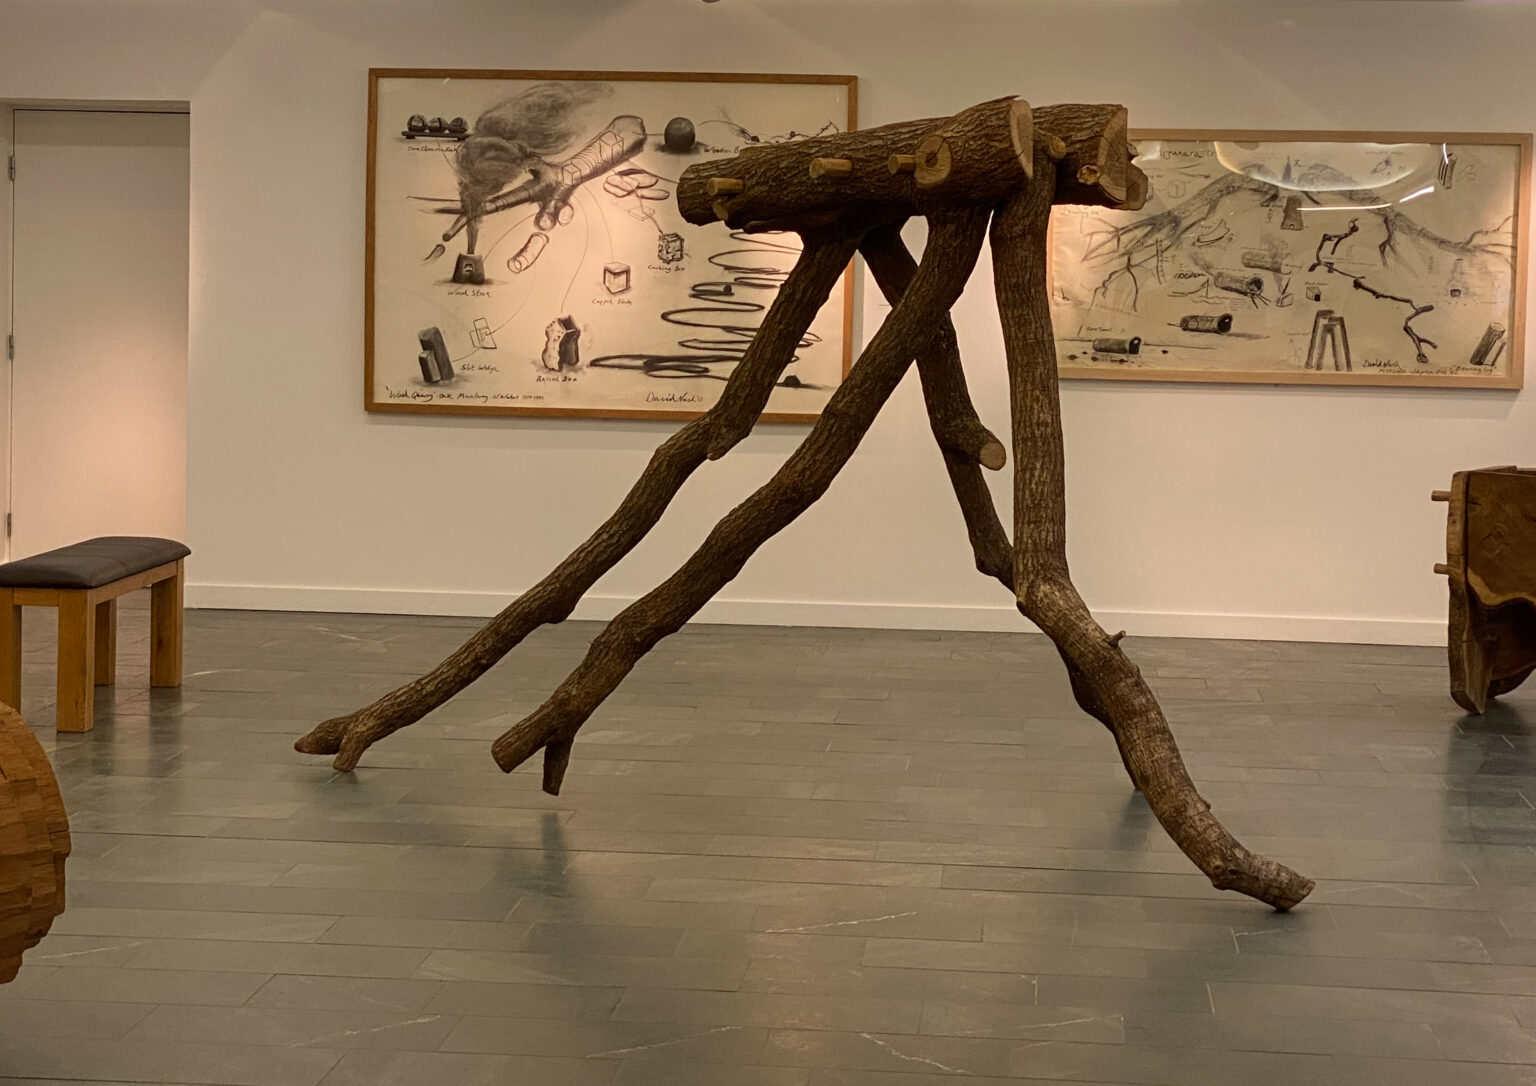 The image shows a wooden sculpture resembling a tree trunk supported by four bowing legs in the centre of the frame, with drawings of tree trunks in frames behind it on the gallery wall.